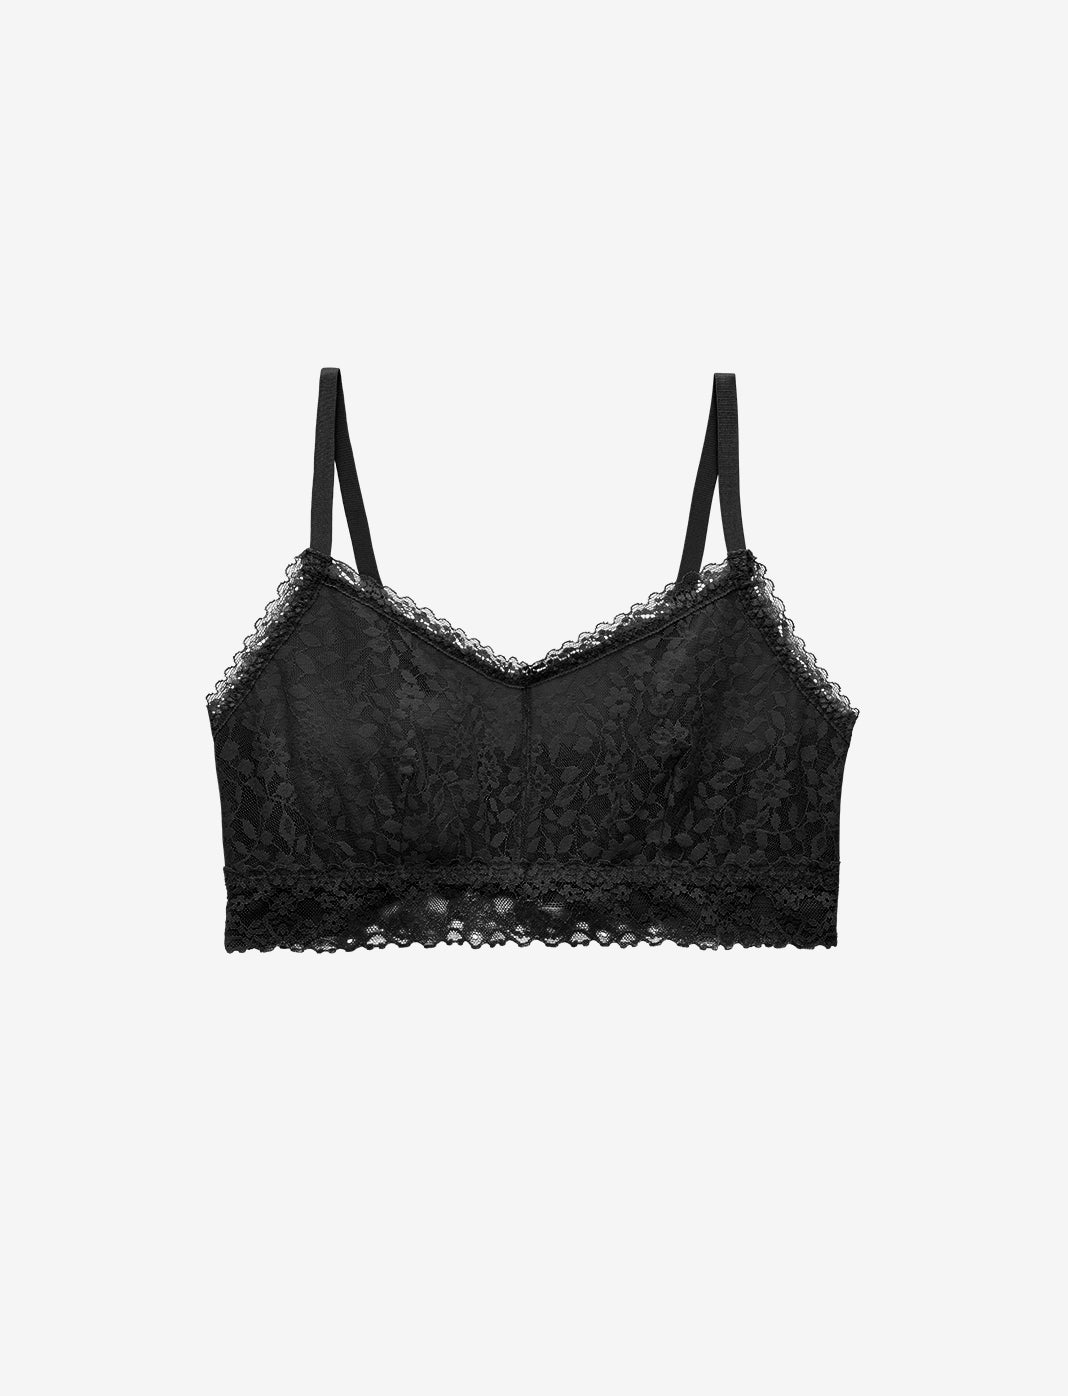 Supportive & Comfortable Bralettes - Best Bralettes for Women - Cute Lace &  Cotton Bralettes